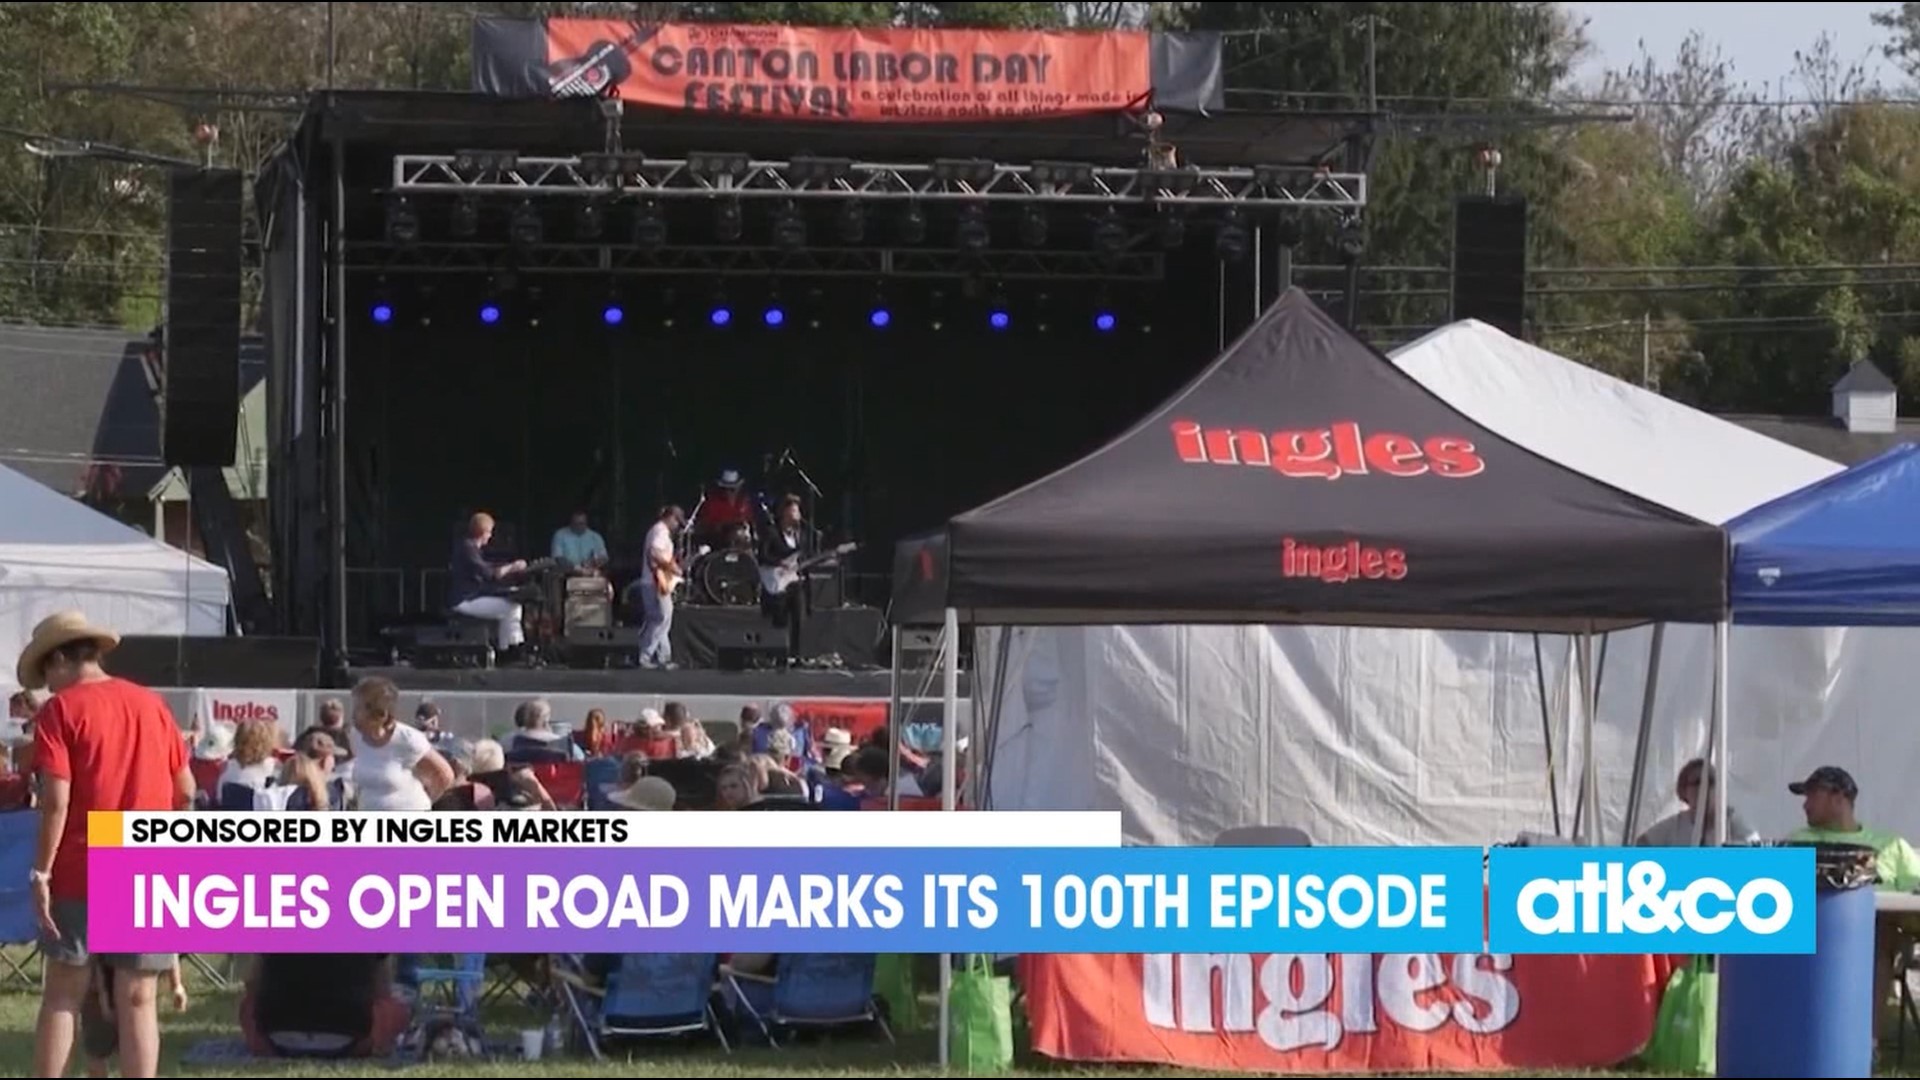 It's all about community and connection! Ingles Markets celebrates their 100th episode, hitting the Ingles Open Road.